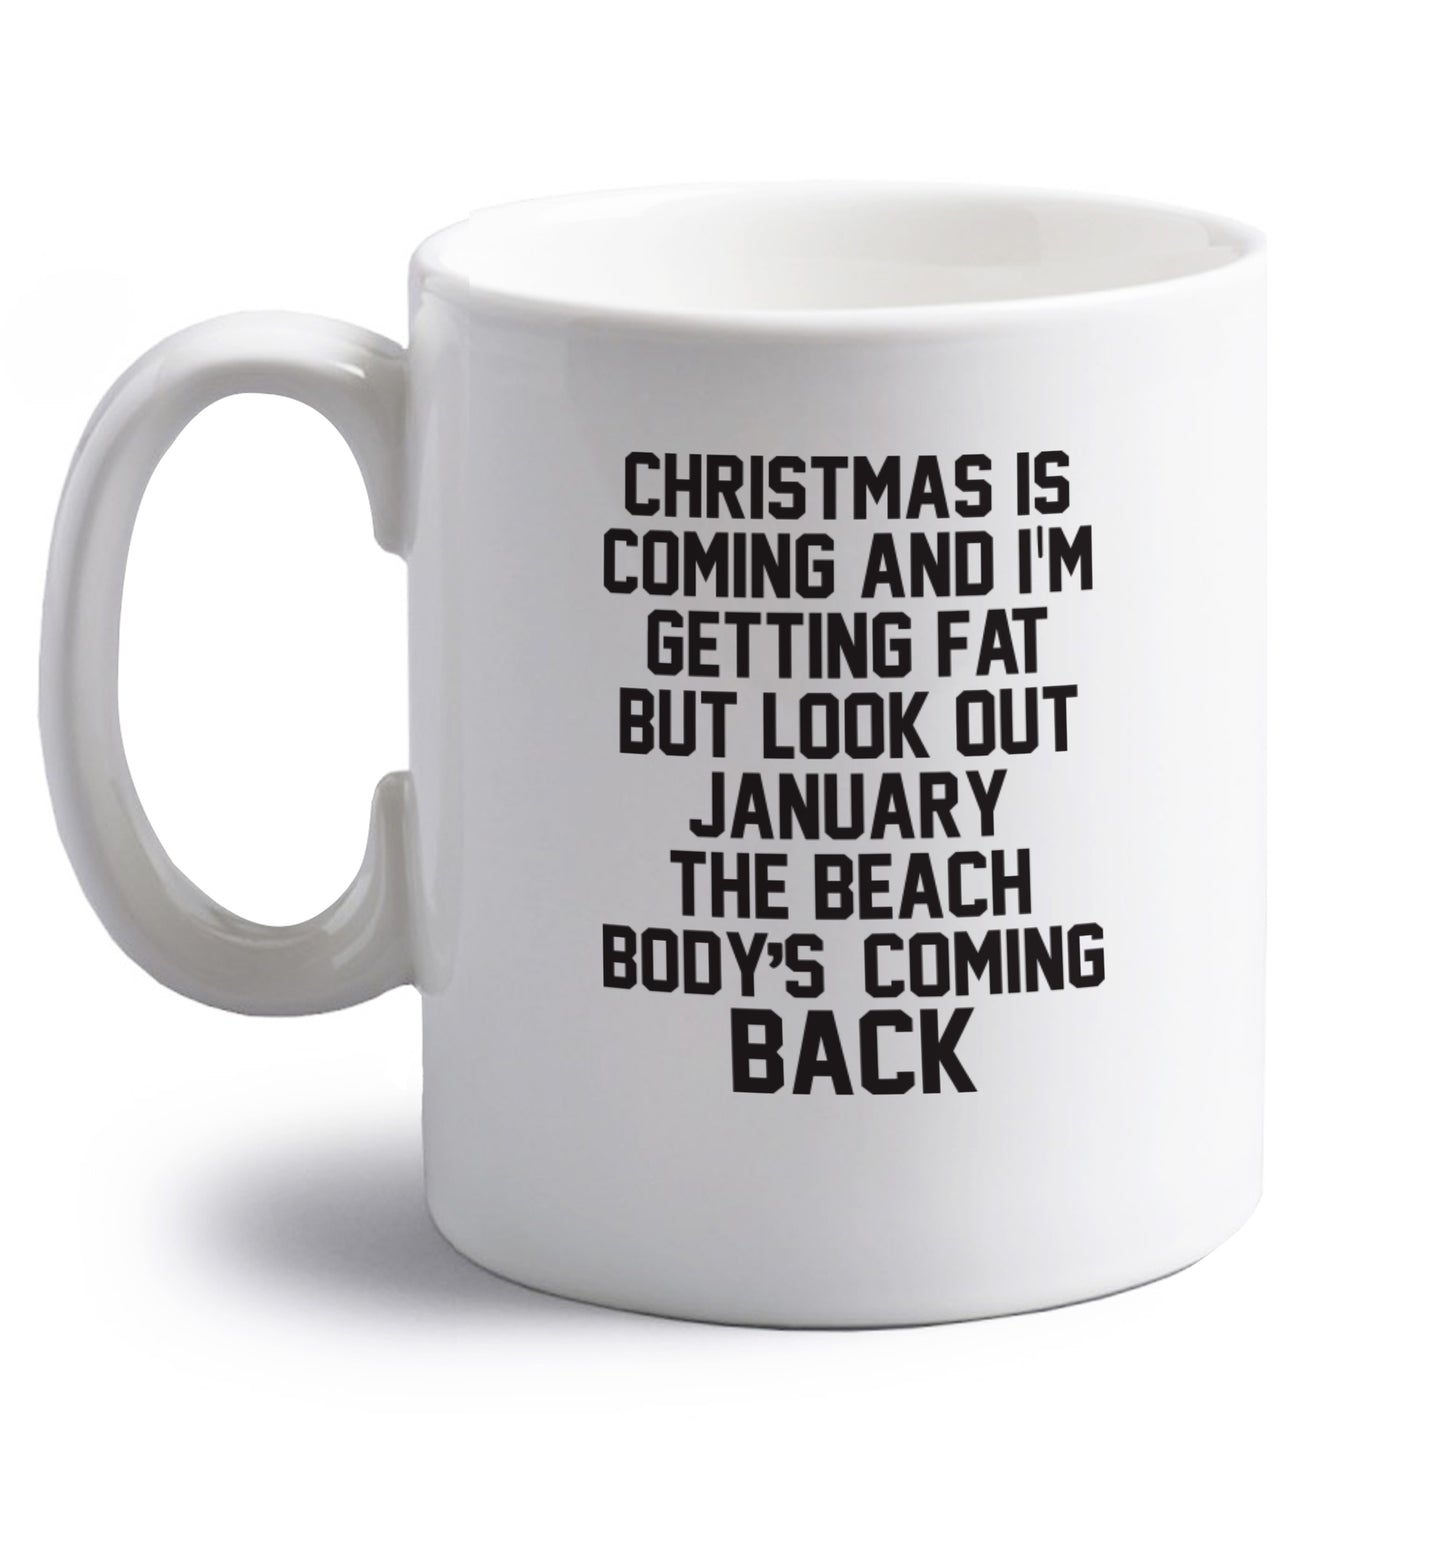 Christmas is coming and I'm getting fat but look out January the beach body's coming back! right handed white ceramic mug 